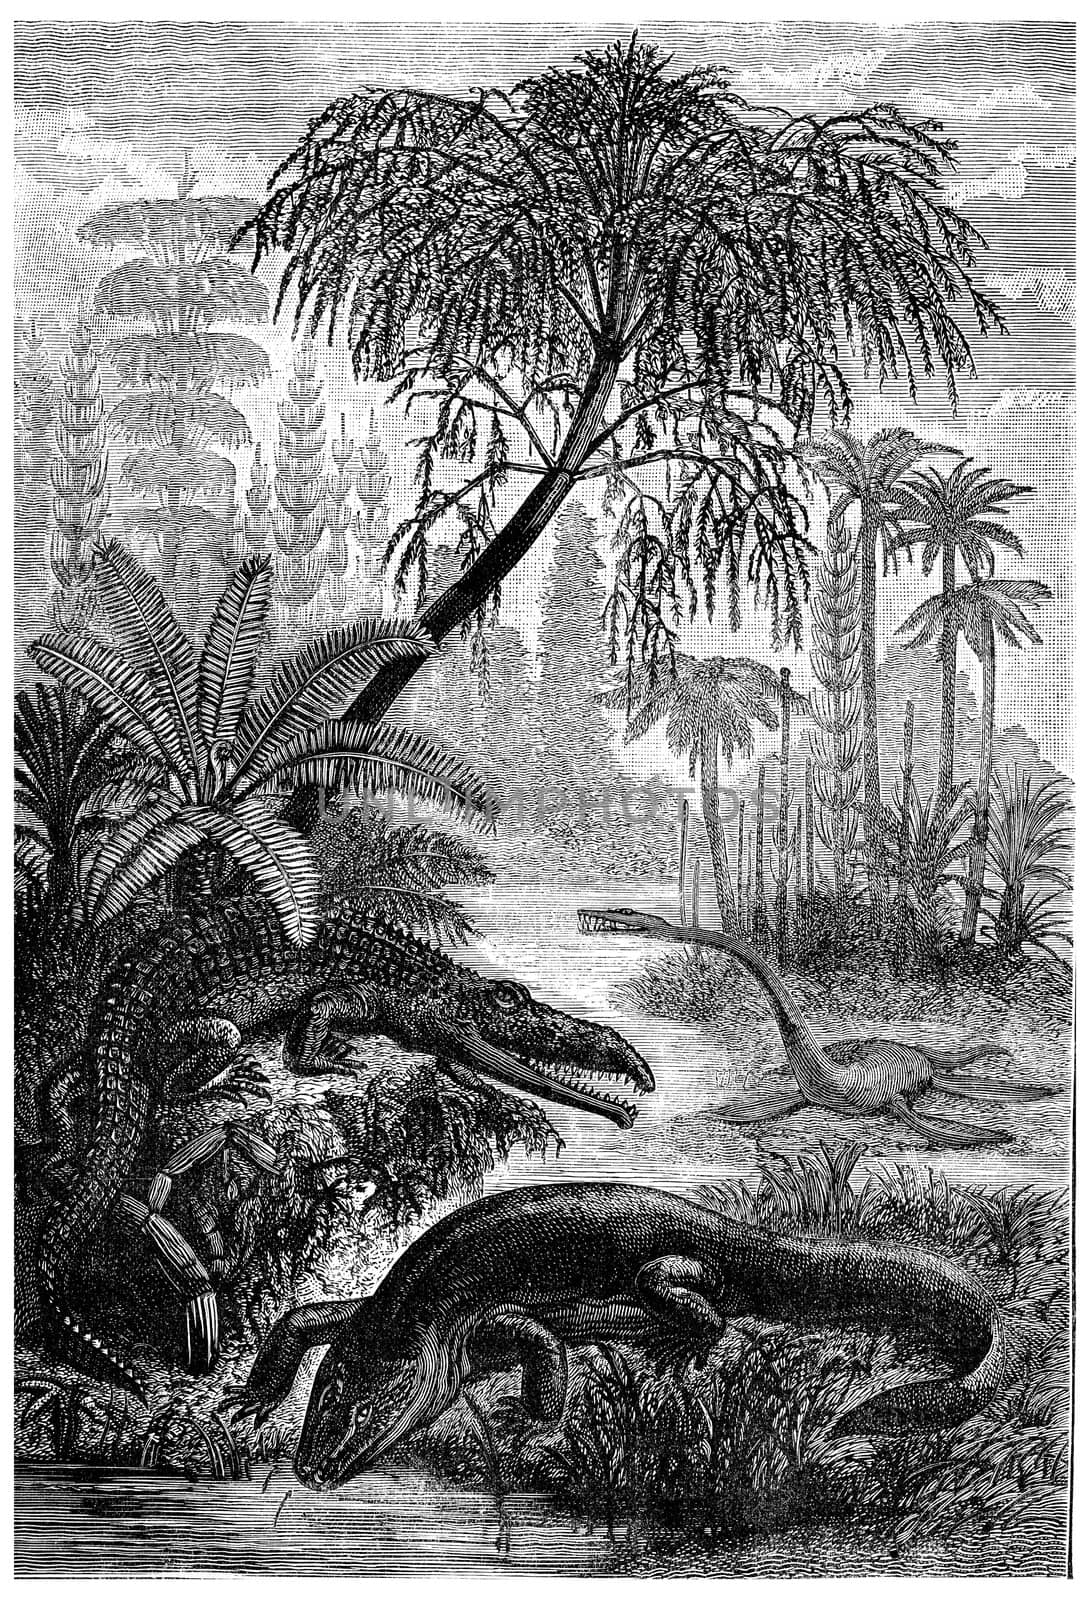 The inhabitants of the Triassic period, capitosaure, beldoux nothosaure, vintage engraved illustration. Earth before man – 1886.